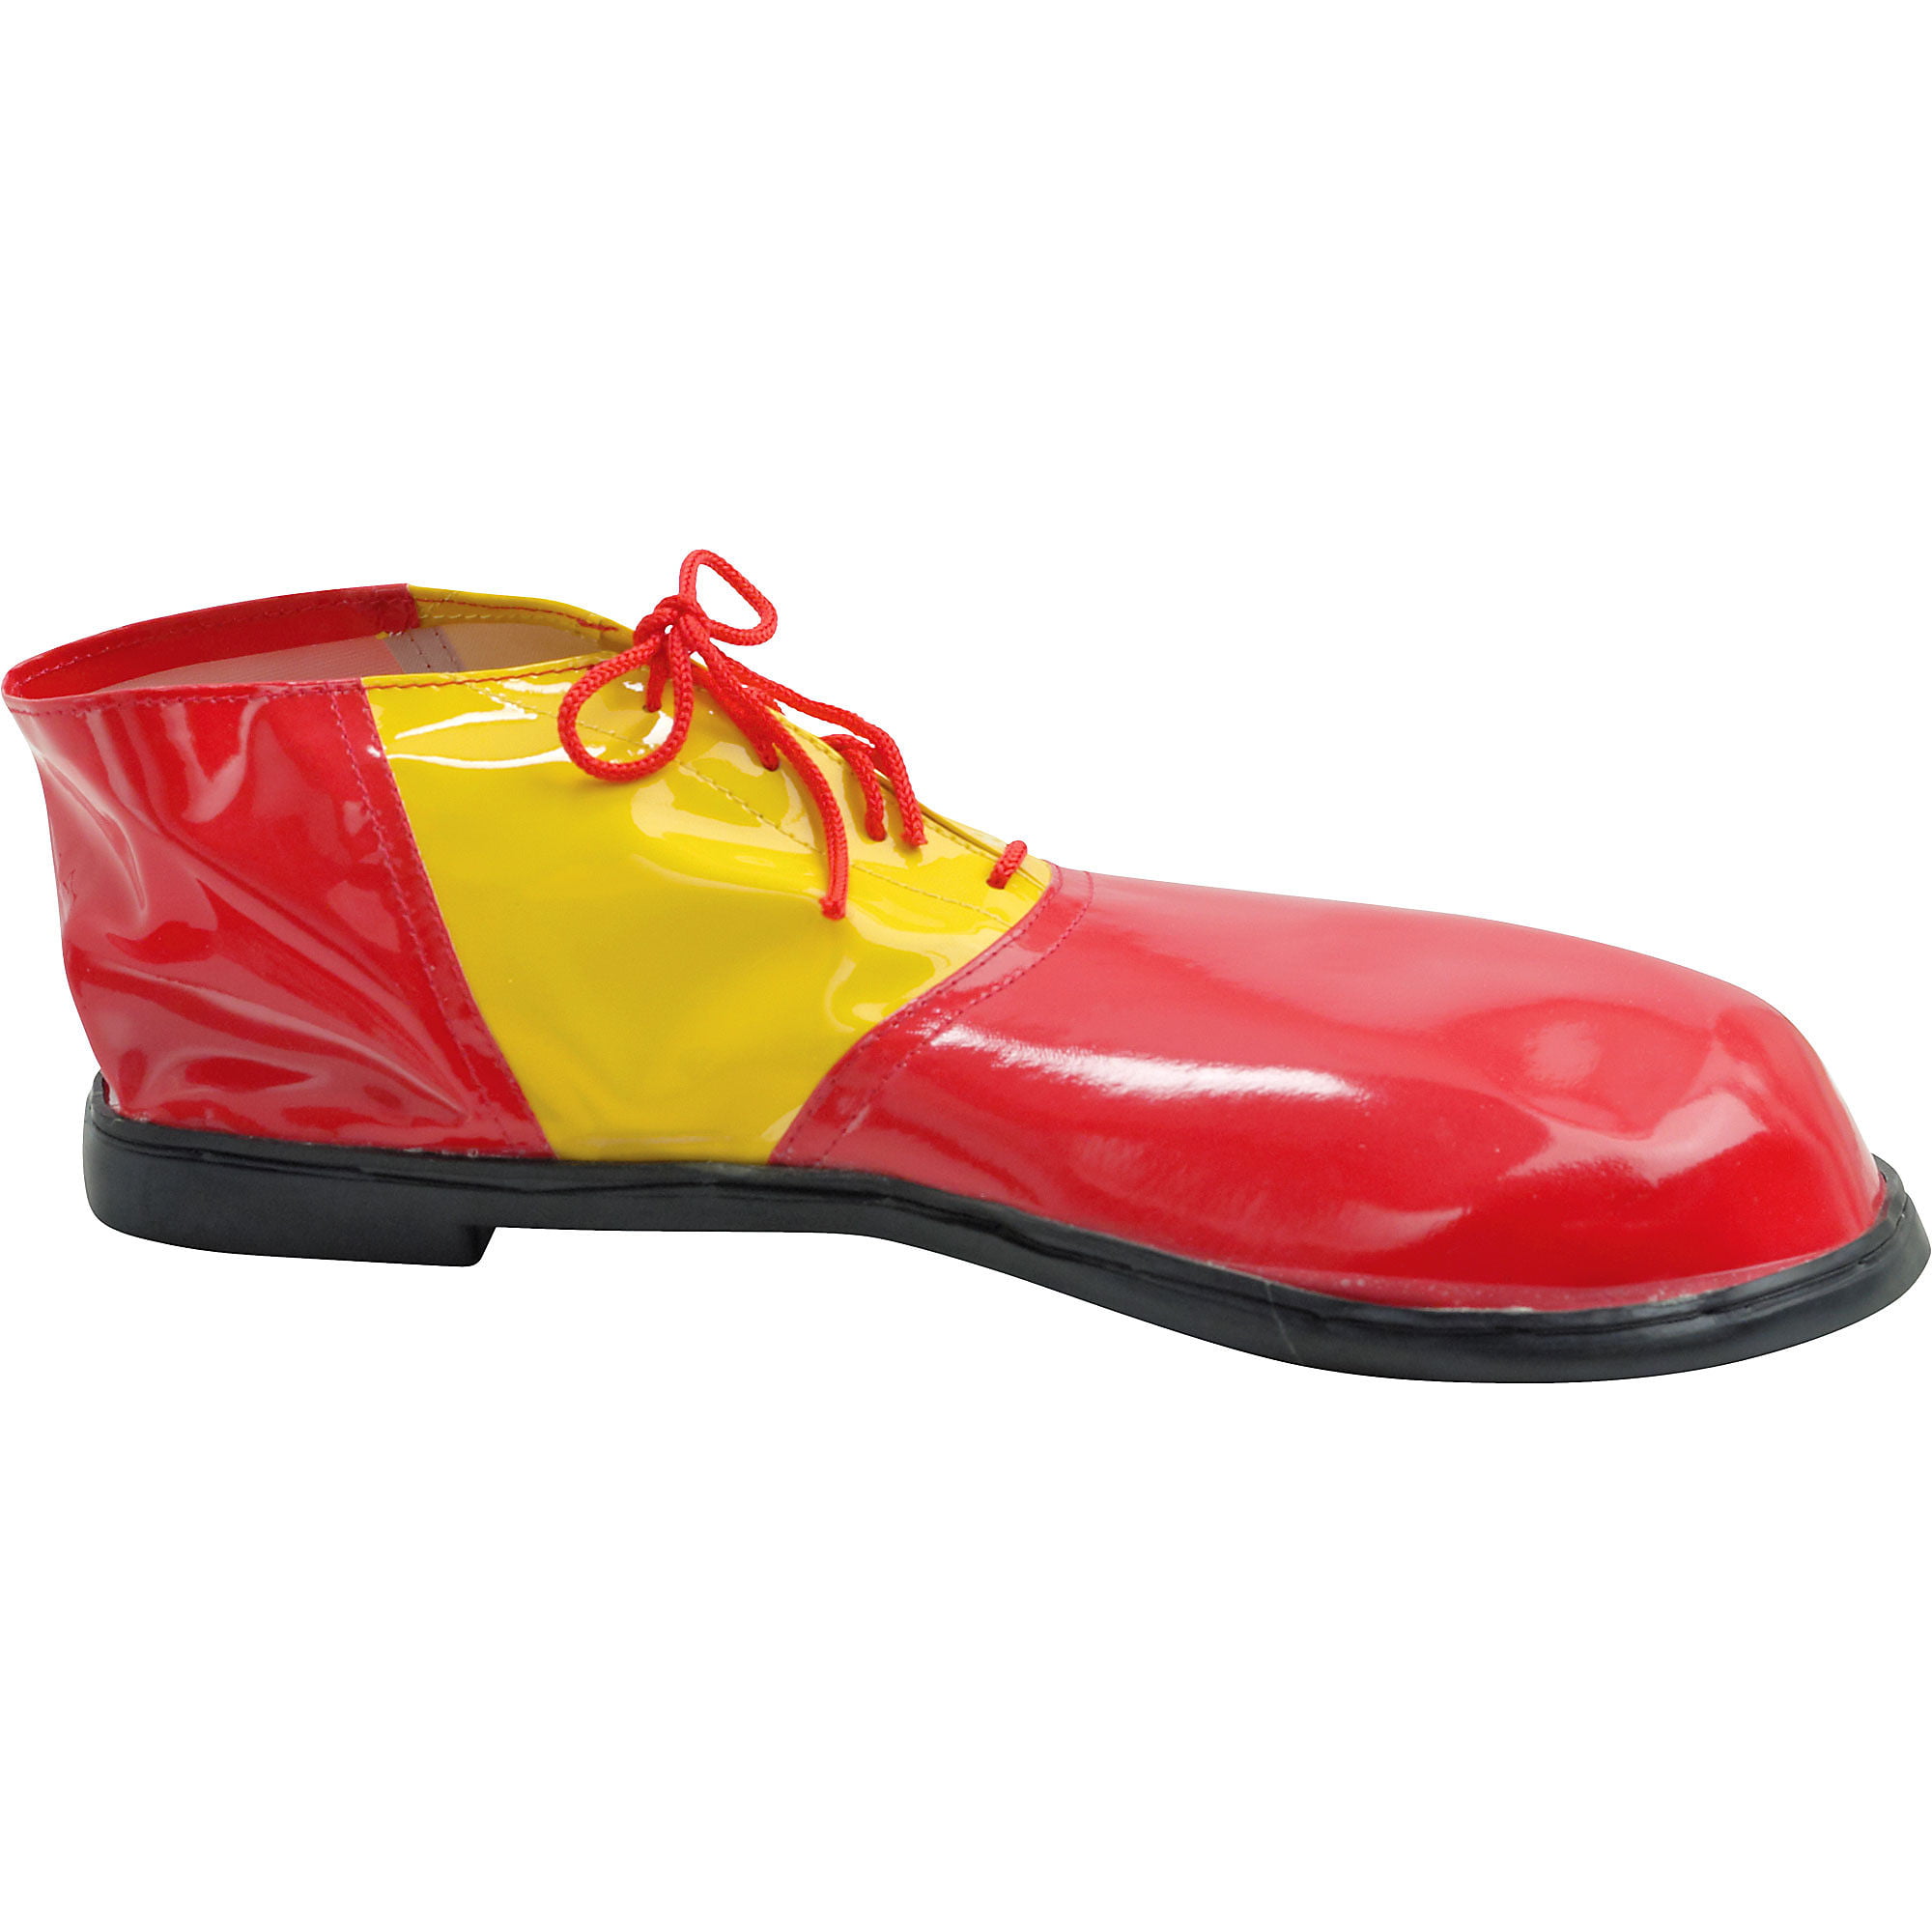 Nicejoy Clown Shoes Halloween Costumes Props Unisex Adult Jumbo Large Clown Shoes Accessories for Parties Cosplay Wear